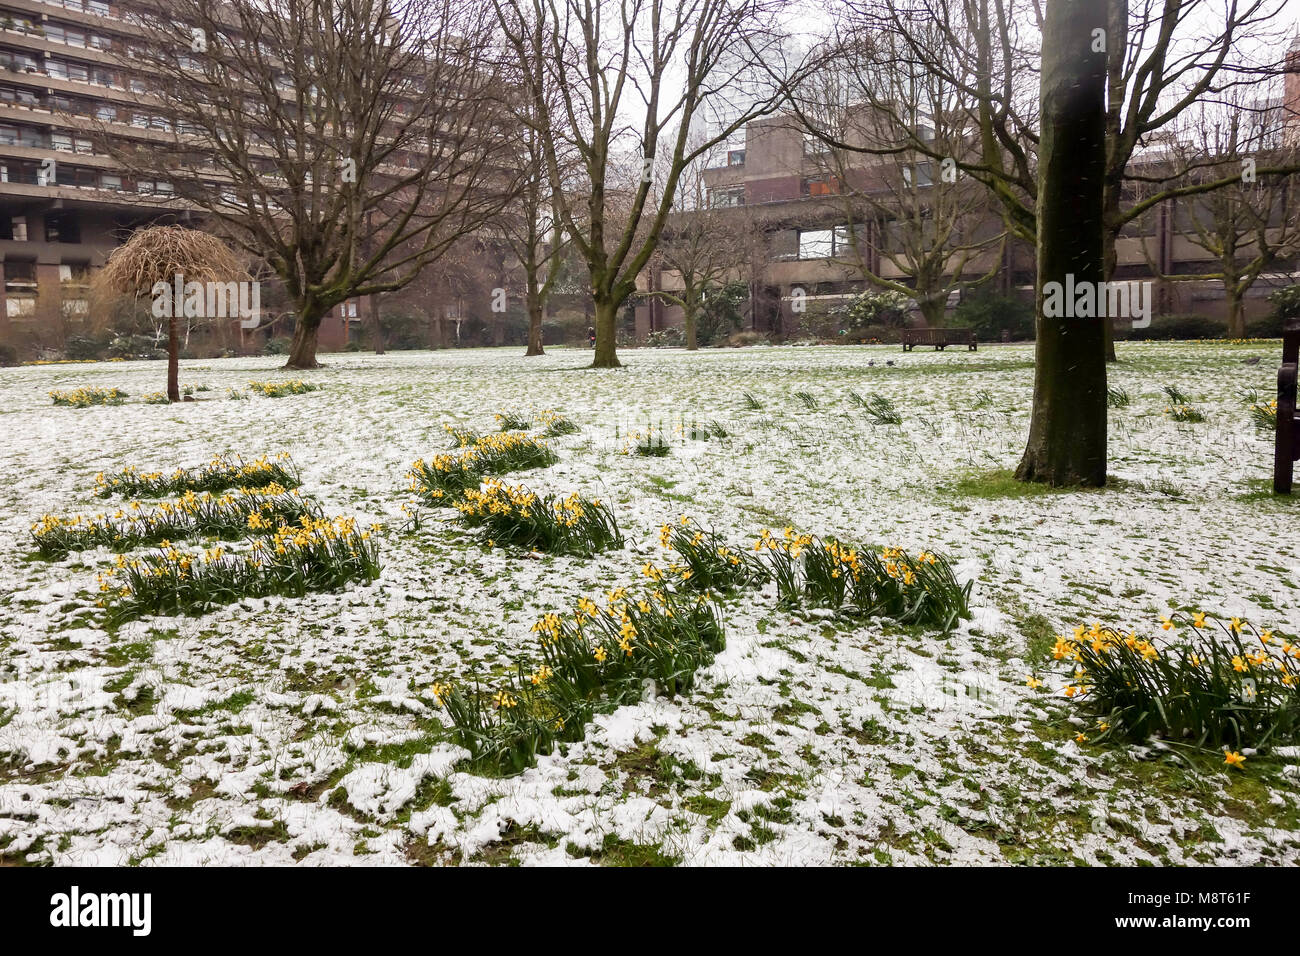 LONDON, UK -18th Mar 2018: Daffodils being covered with snow before the new Spring season in the Barbican. Stock Photo